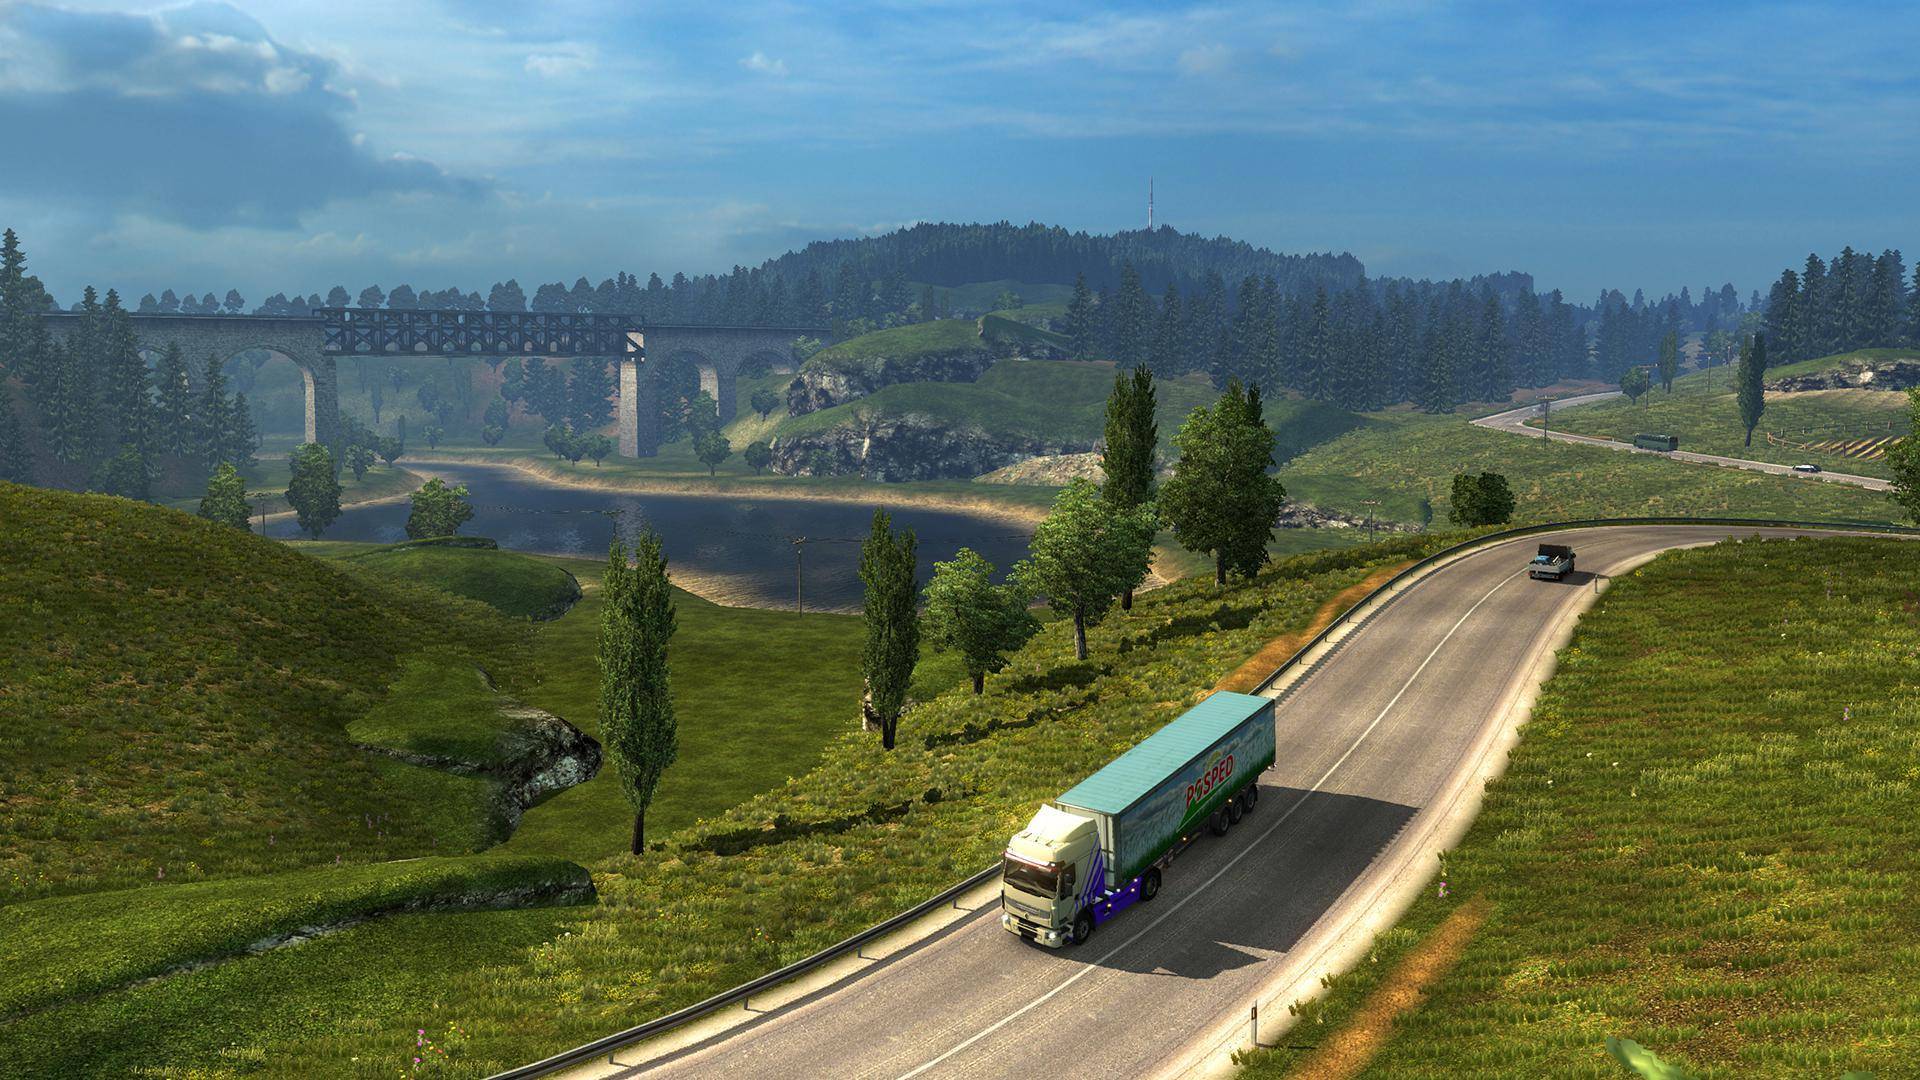 Euro Truck Simulator 2 Legendary Edition (PC) Key cheap - Price of $18.80  for Steam